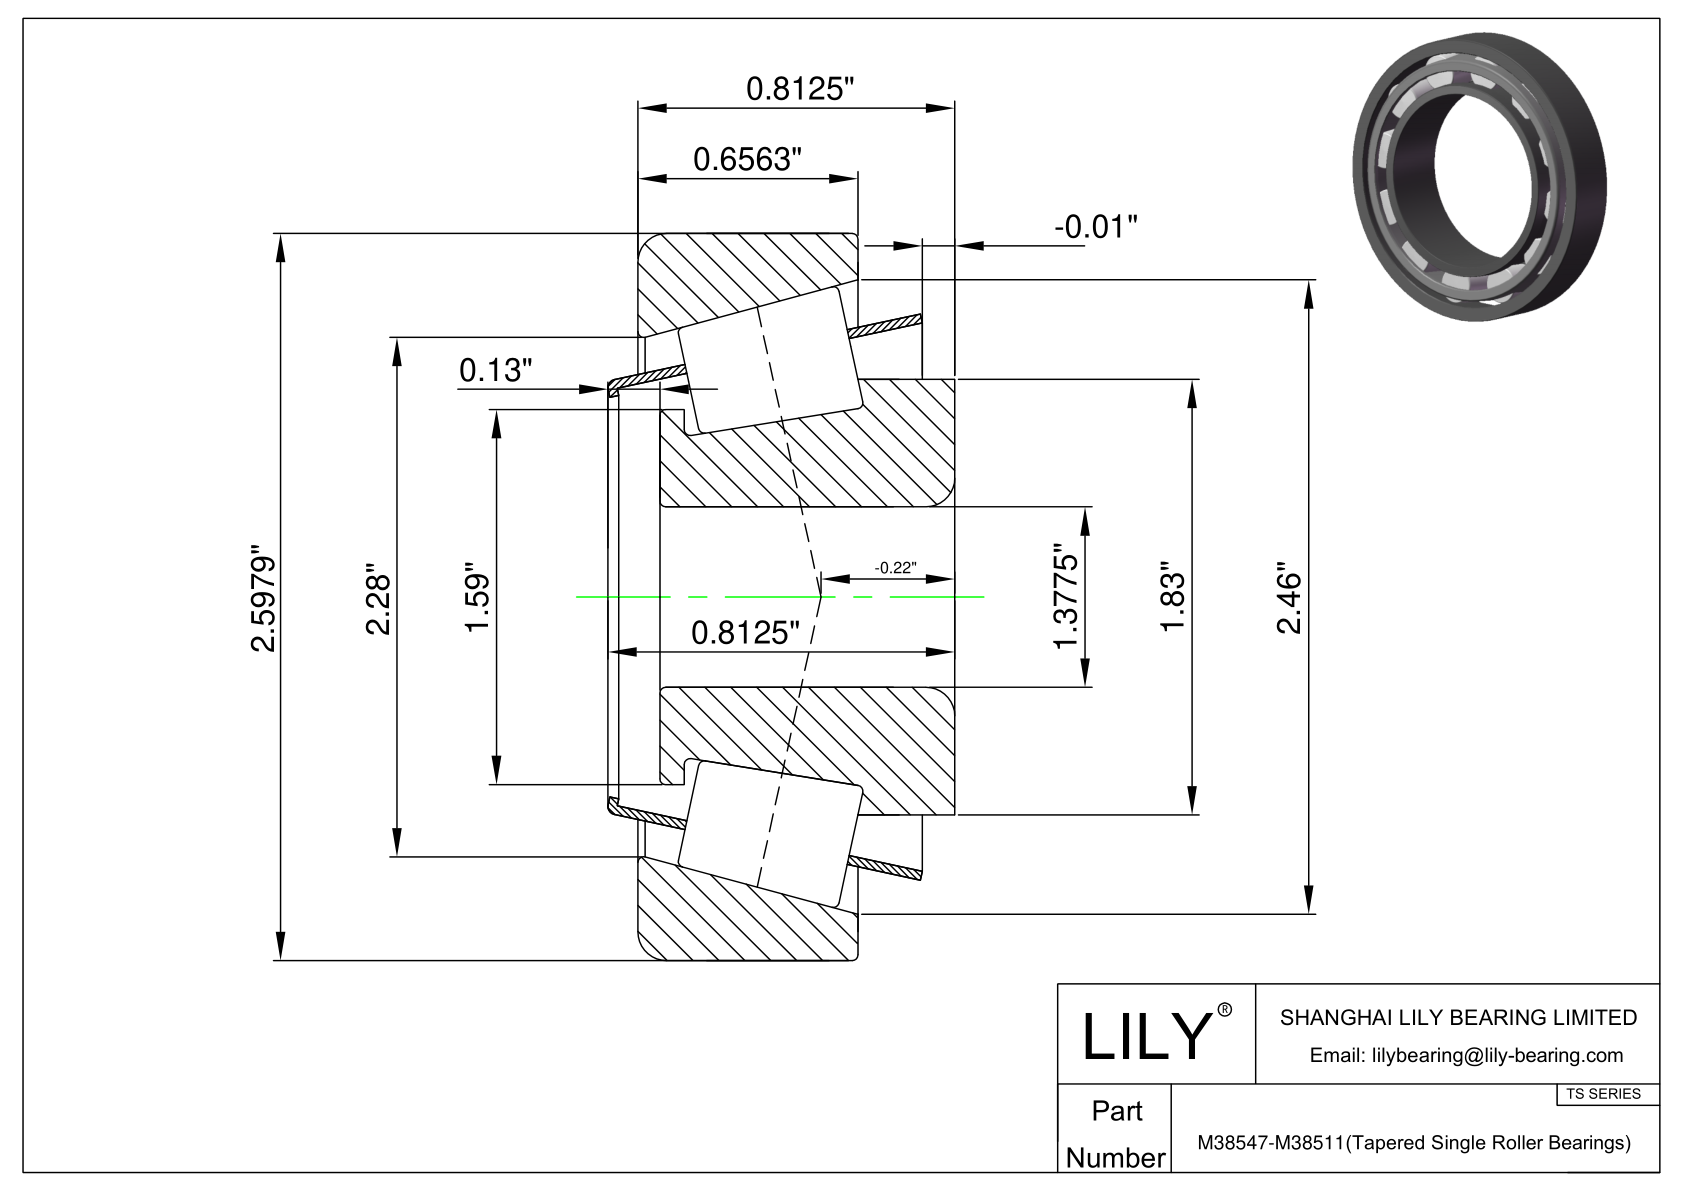 M38547-M38511 TS (Tapered Single Roller Bearings) (Imperial) cad drawing